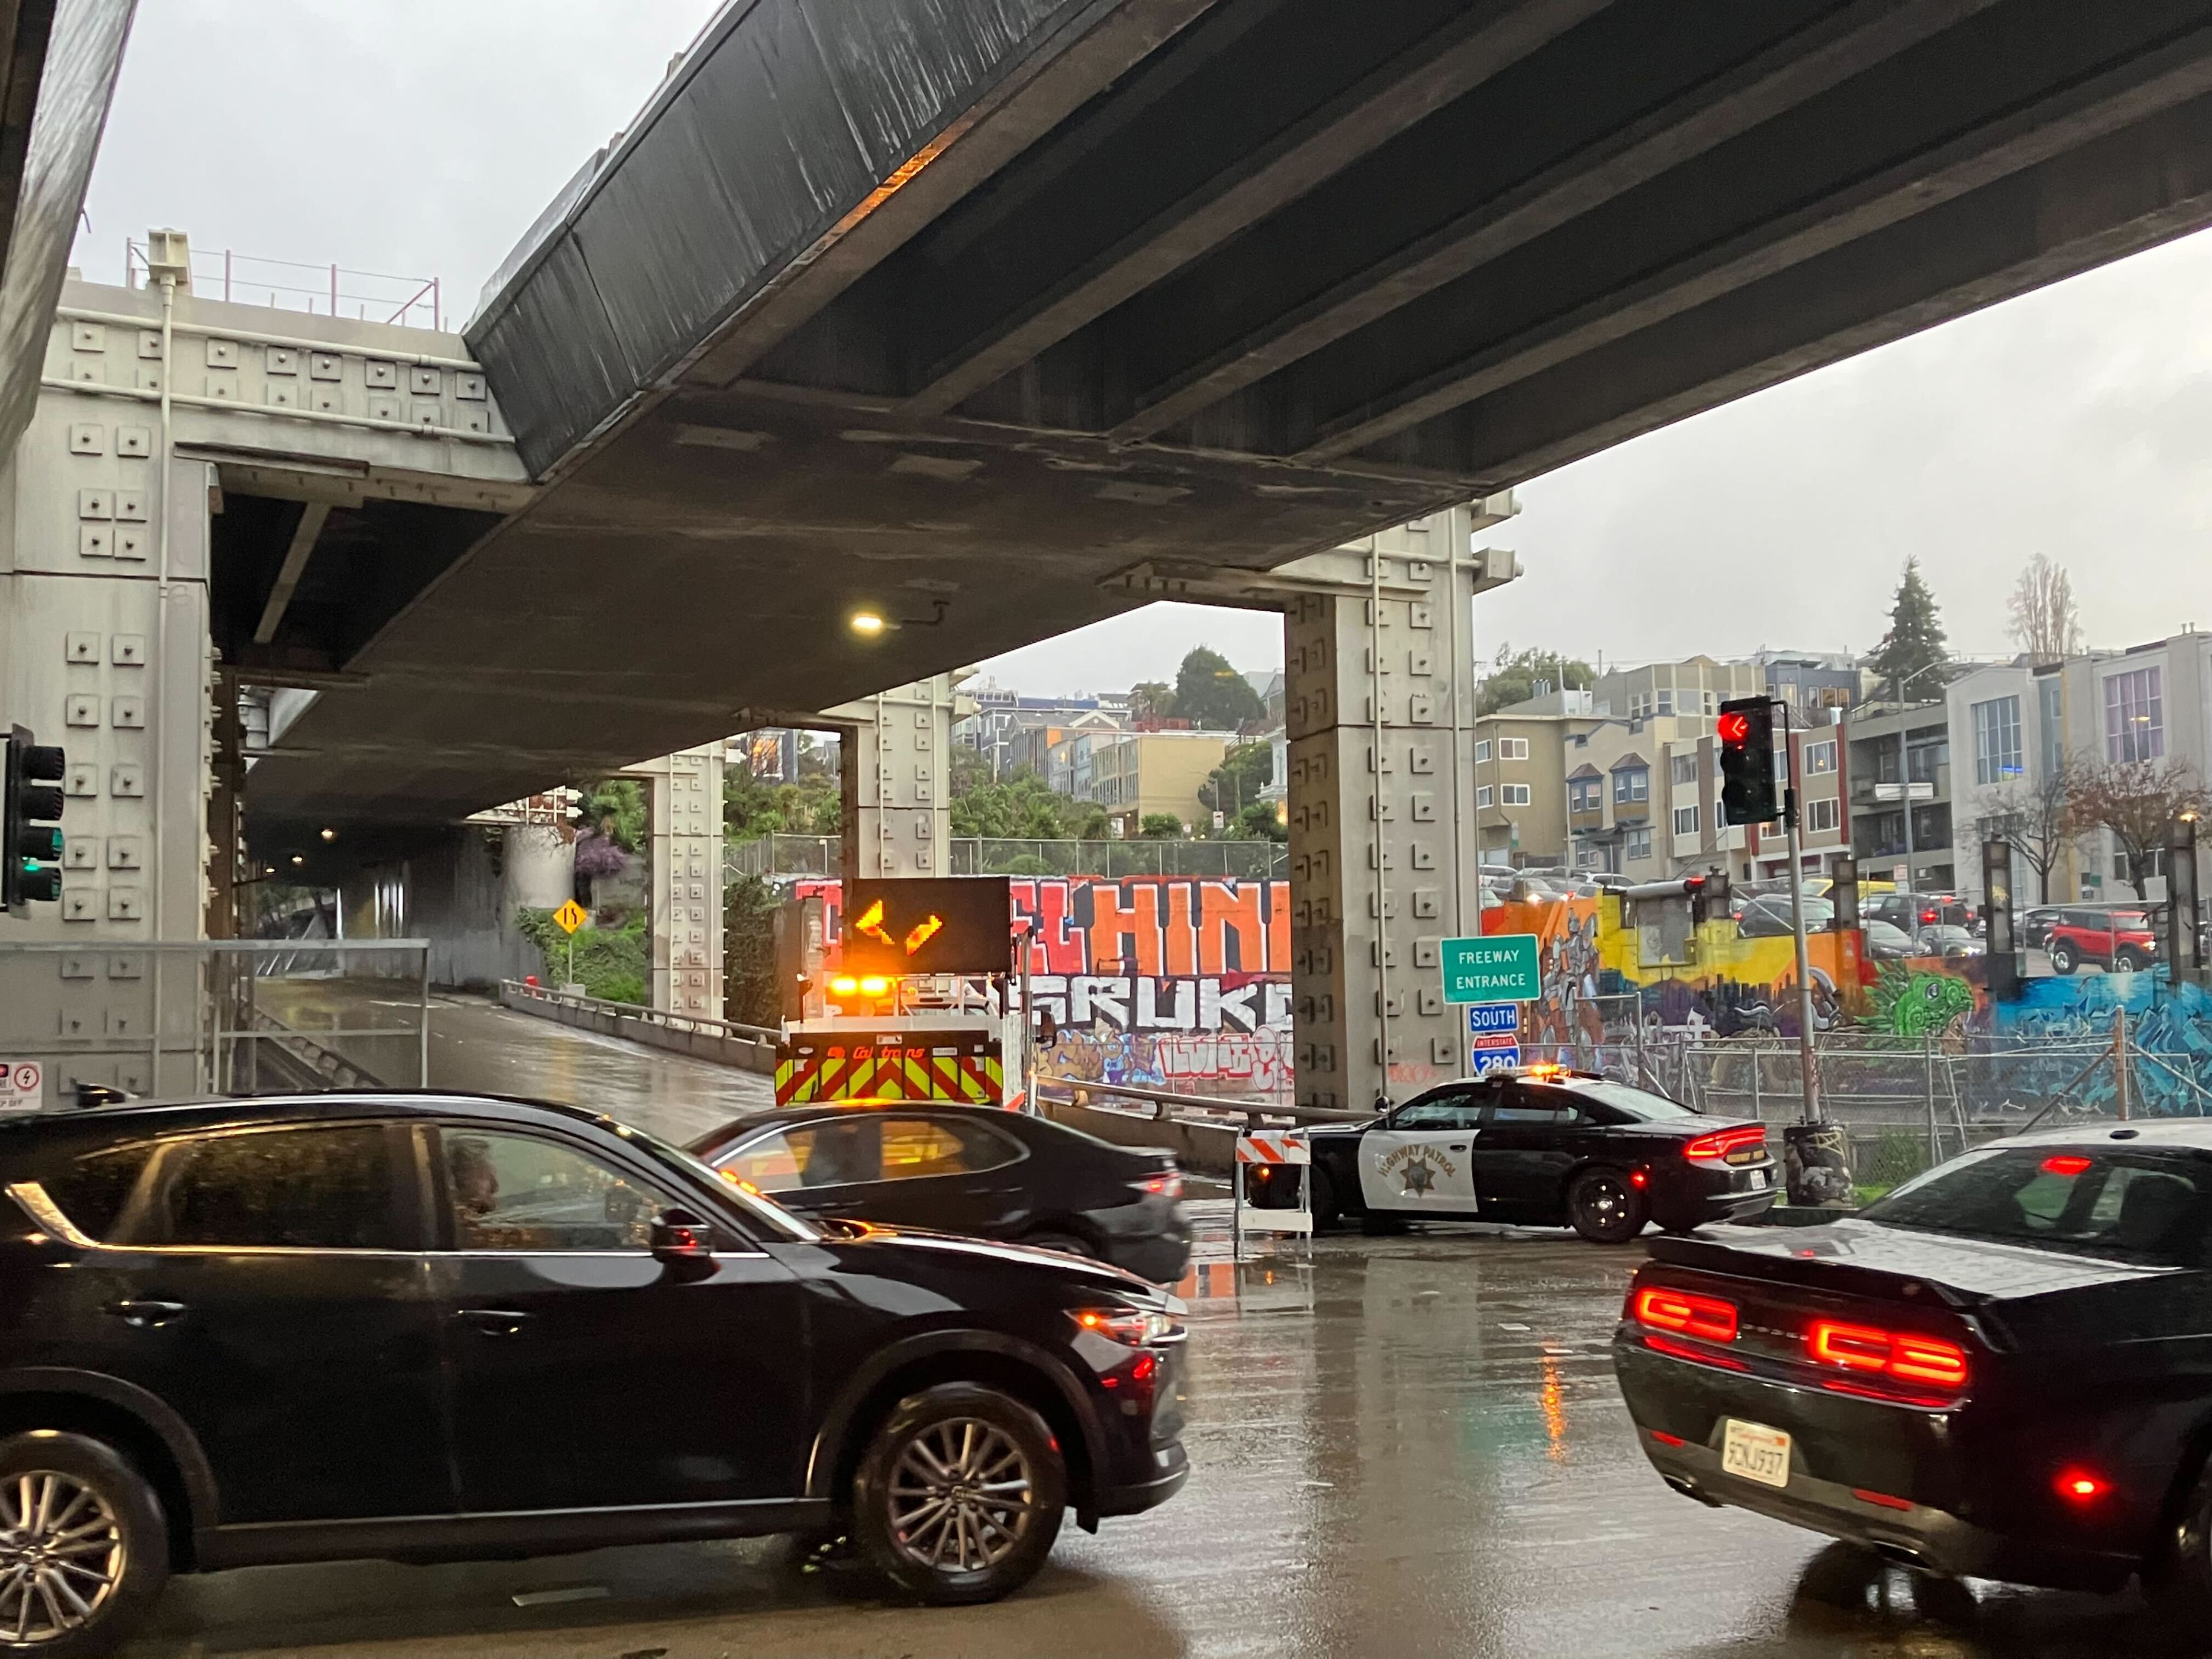 A rainy city scene under an overpass, with cars stopped at a traffic light and colorful graffiti on the sidewalls.